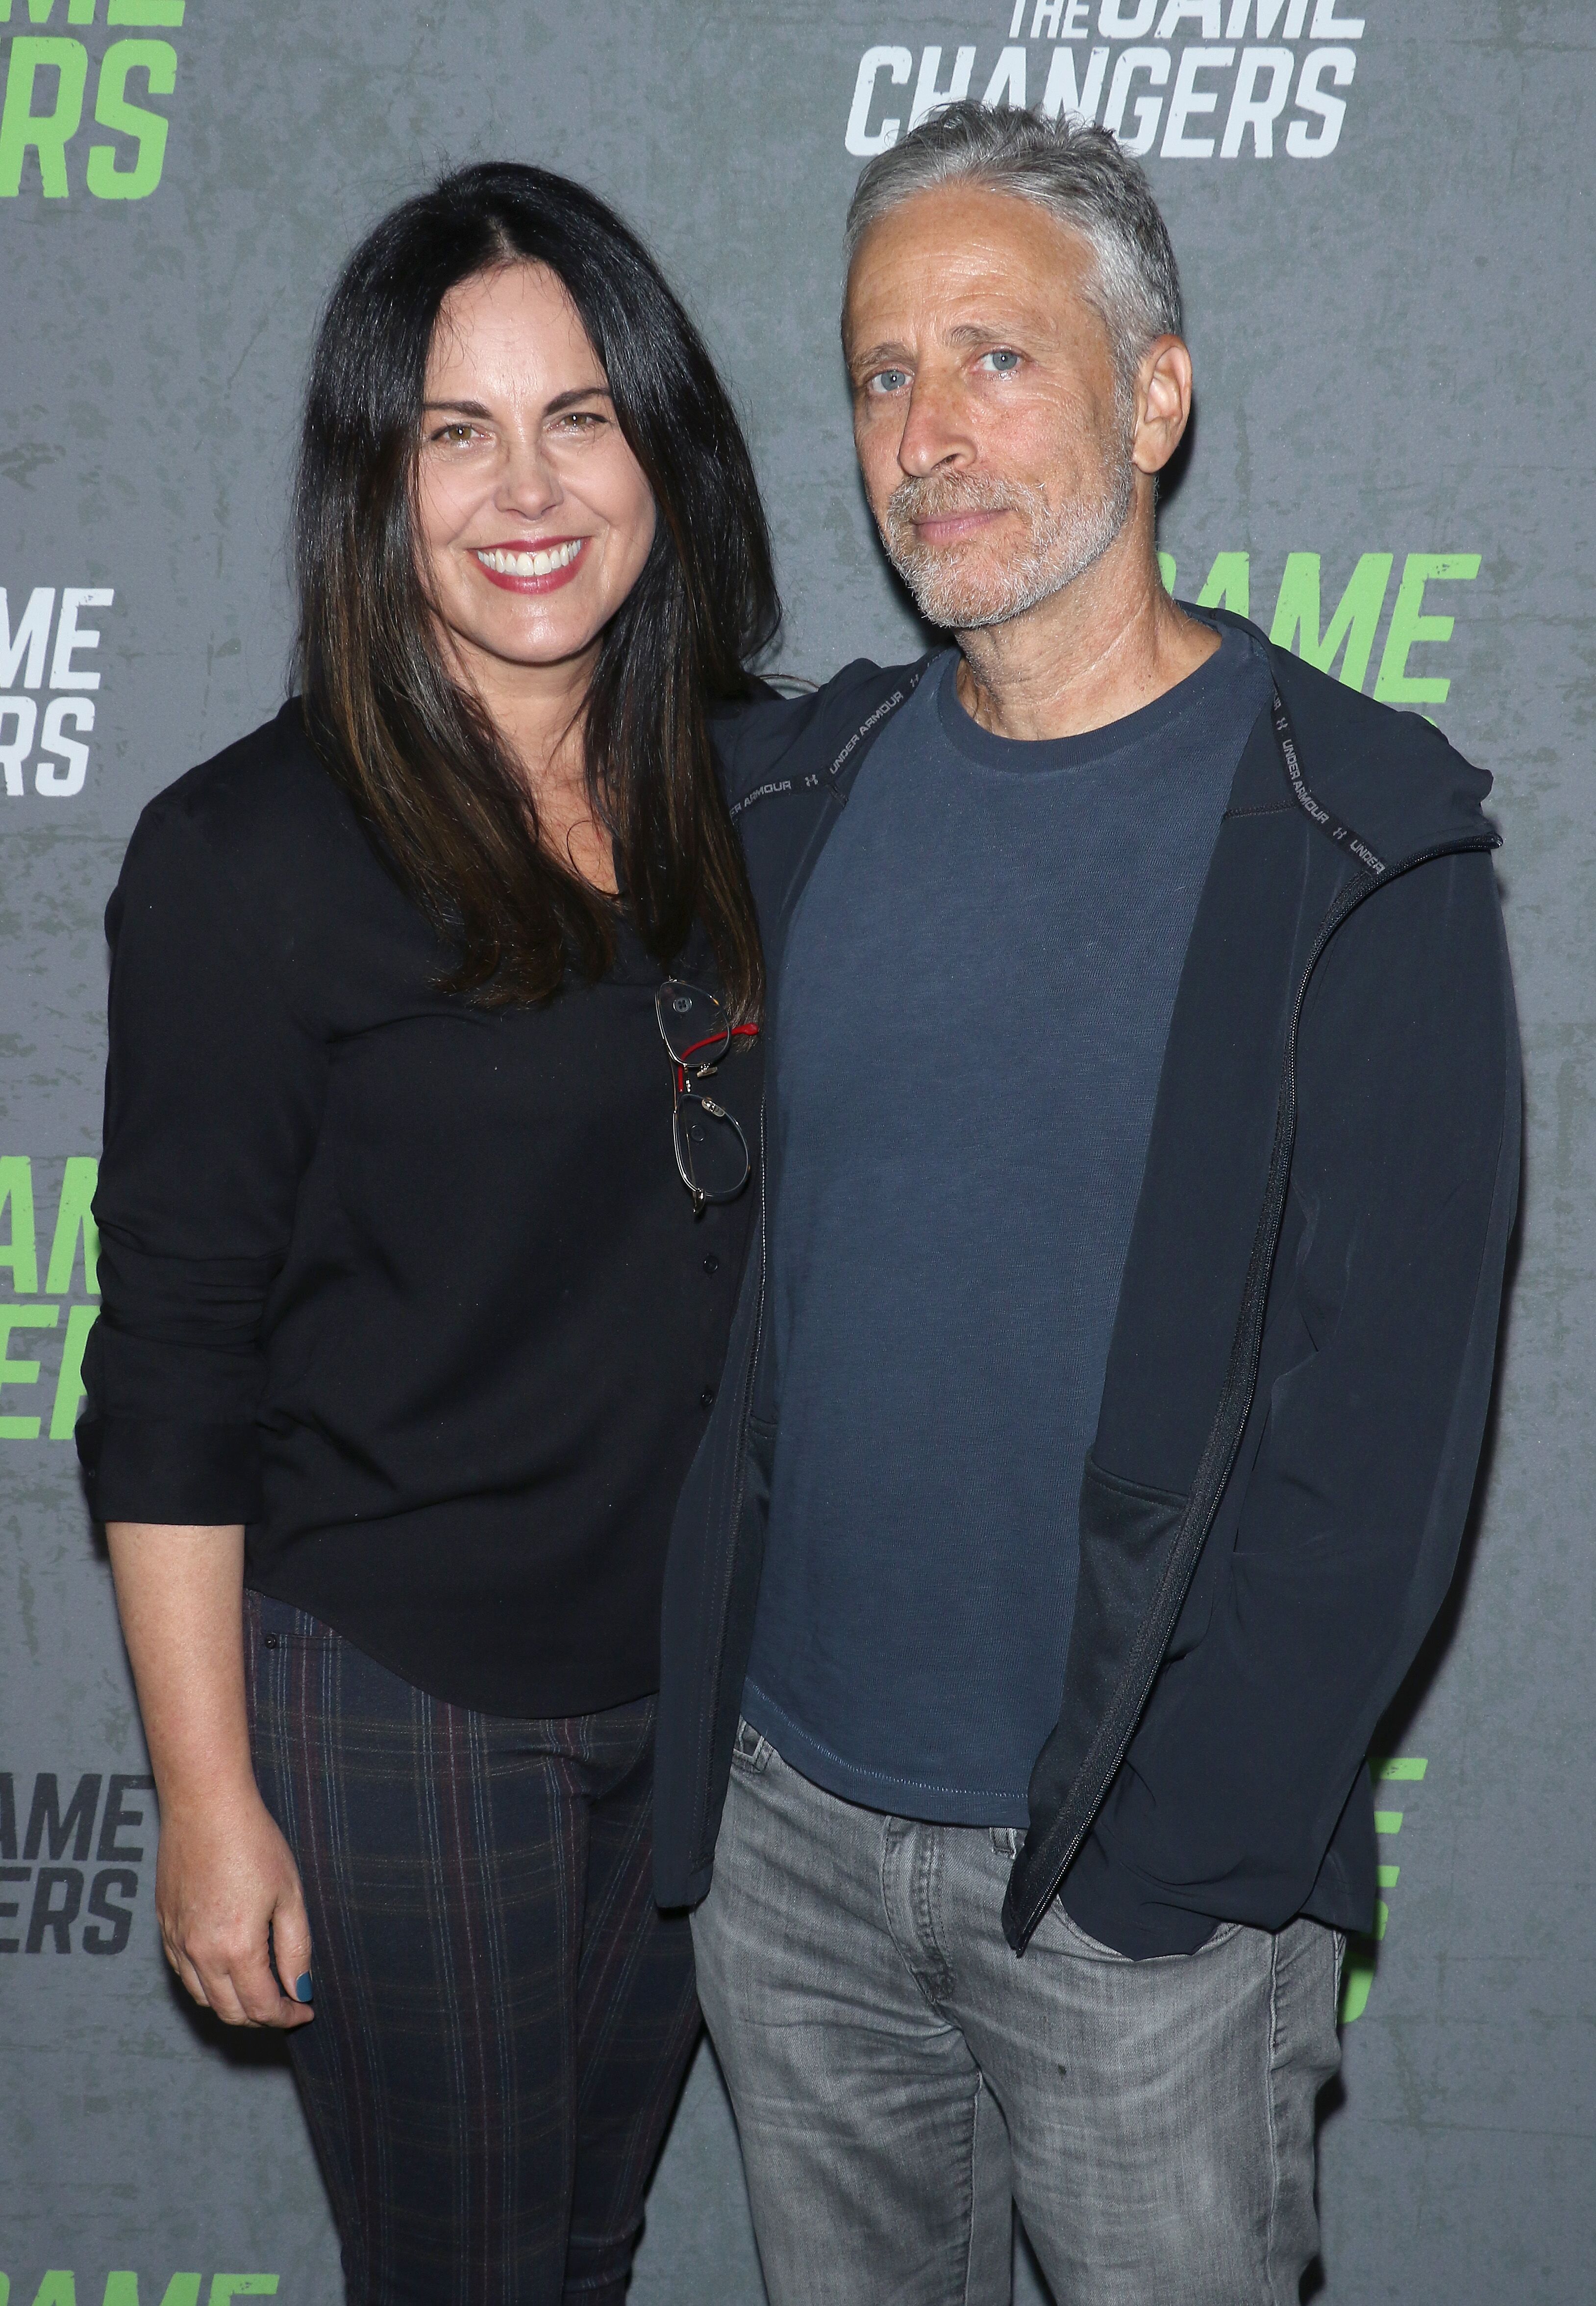 Tracey McShane and comedian Jon Stewart attend the "The Game Changers" New York premiere. | Source: Getty Images